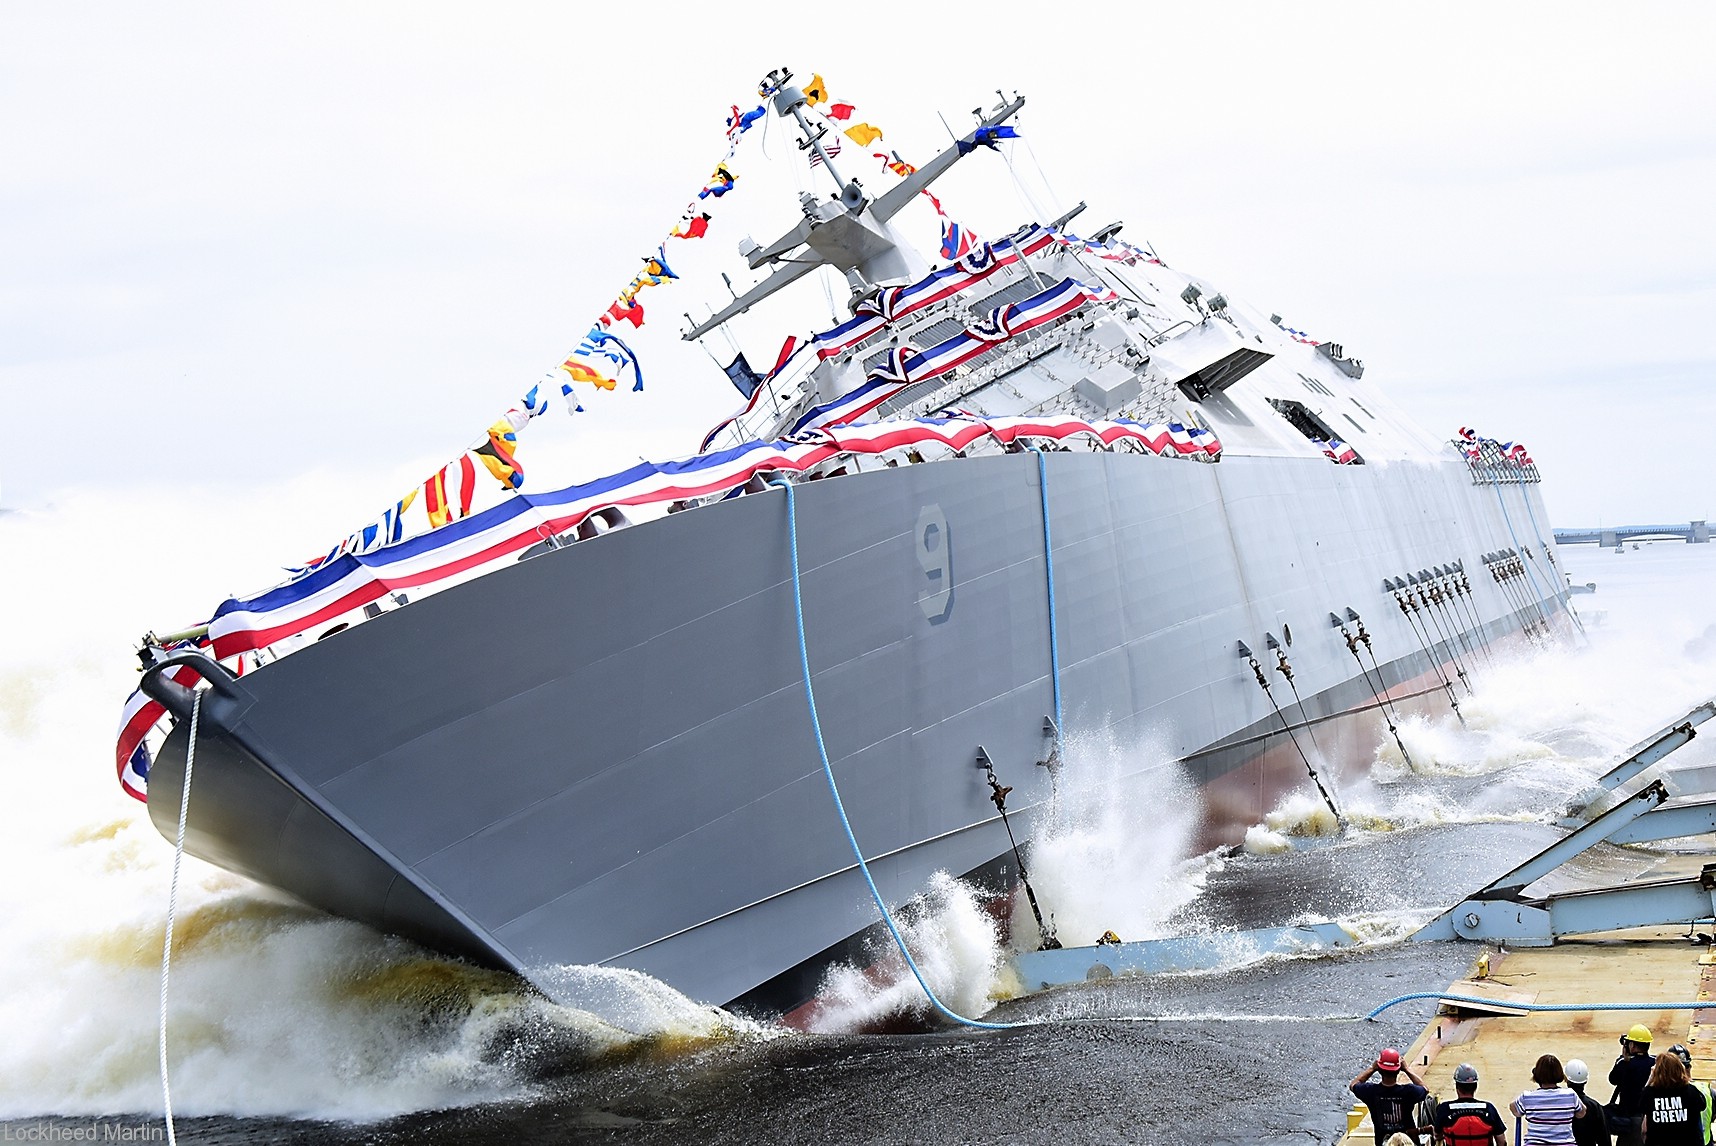 lcs-9 uss little rock freedom class littoral combat ship us navy 02 christening launching